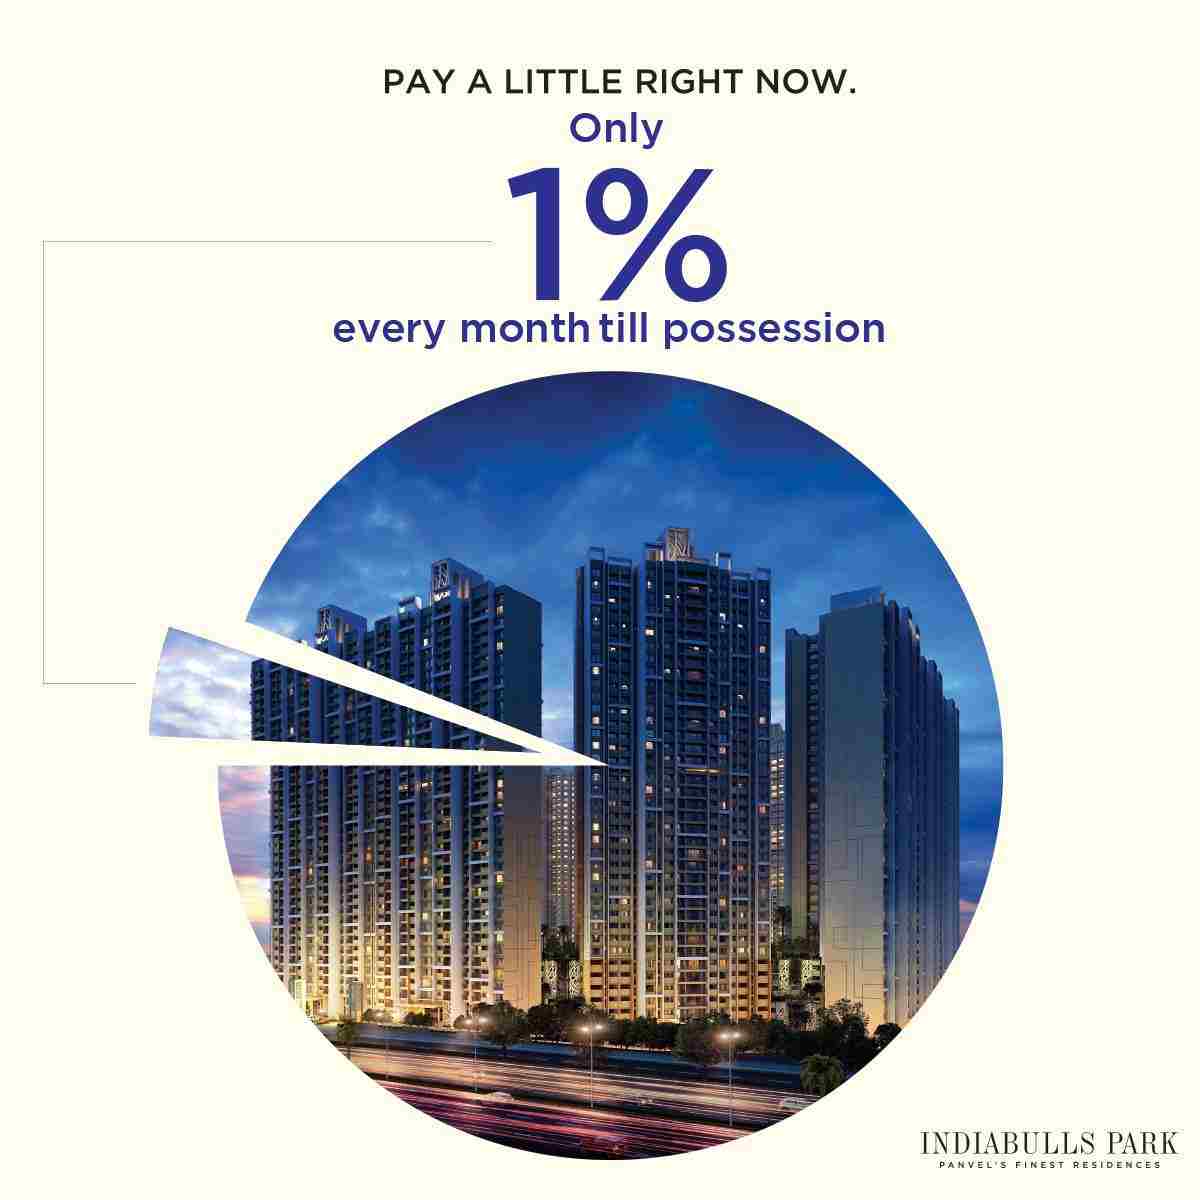 Only 1% can help you open new doors to a new life at Indiabulls Park in Navi Mumbai Update